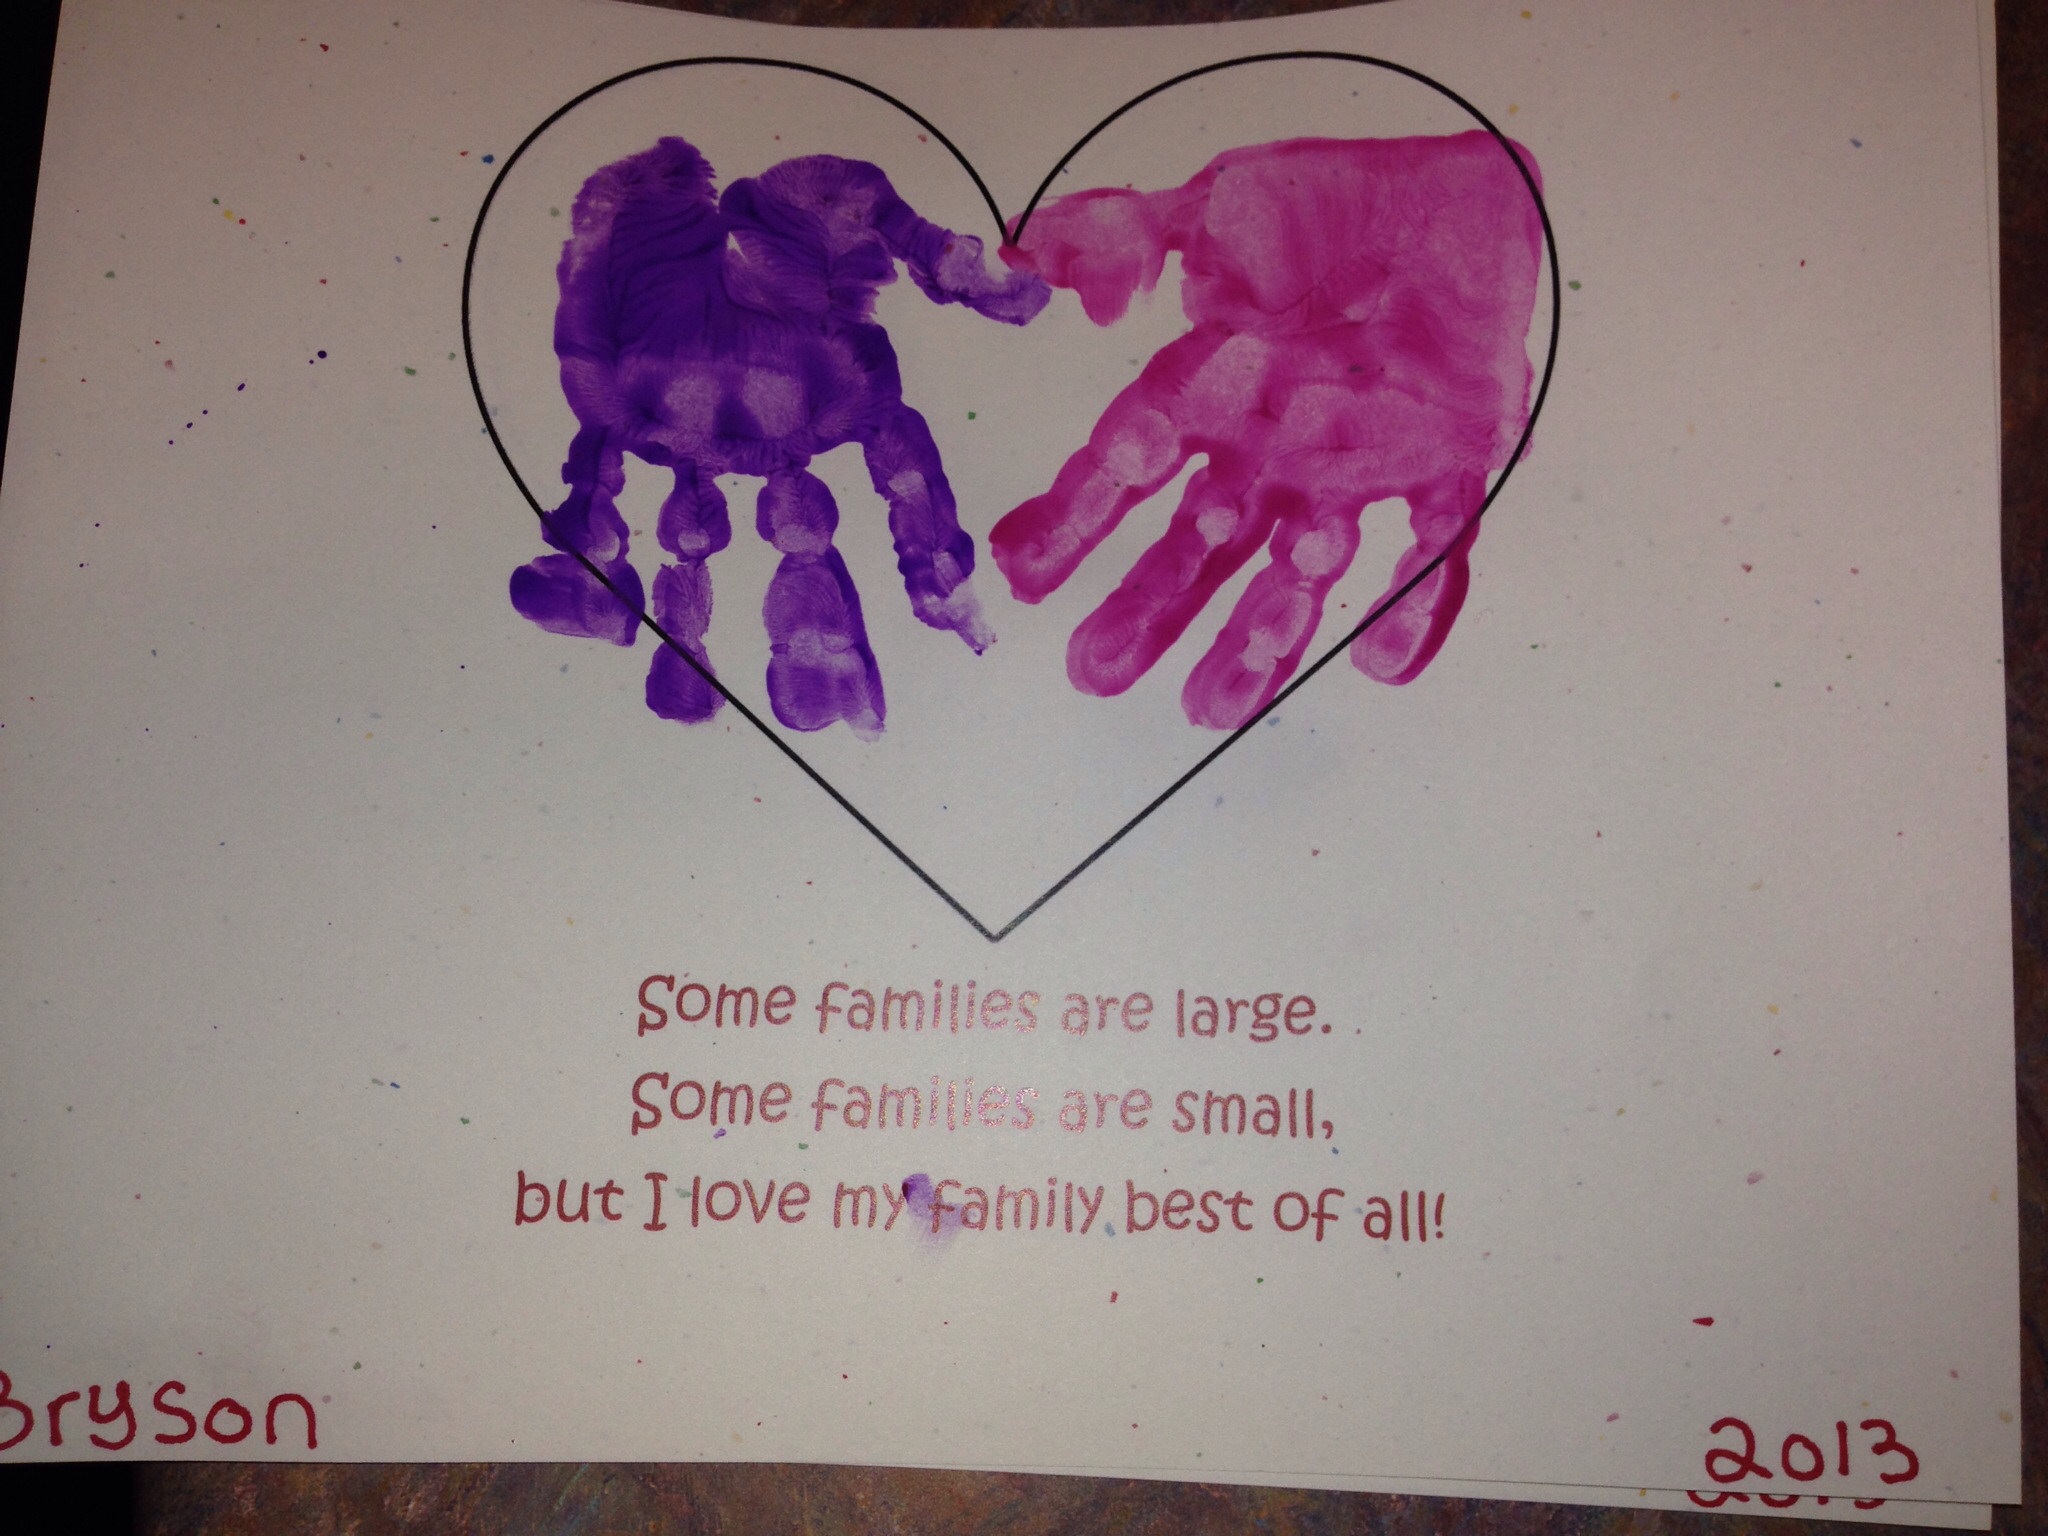 2048x1536 I love my family best of all! -craft for family theme